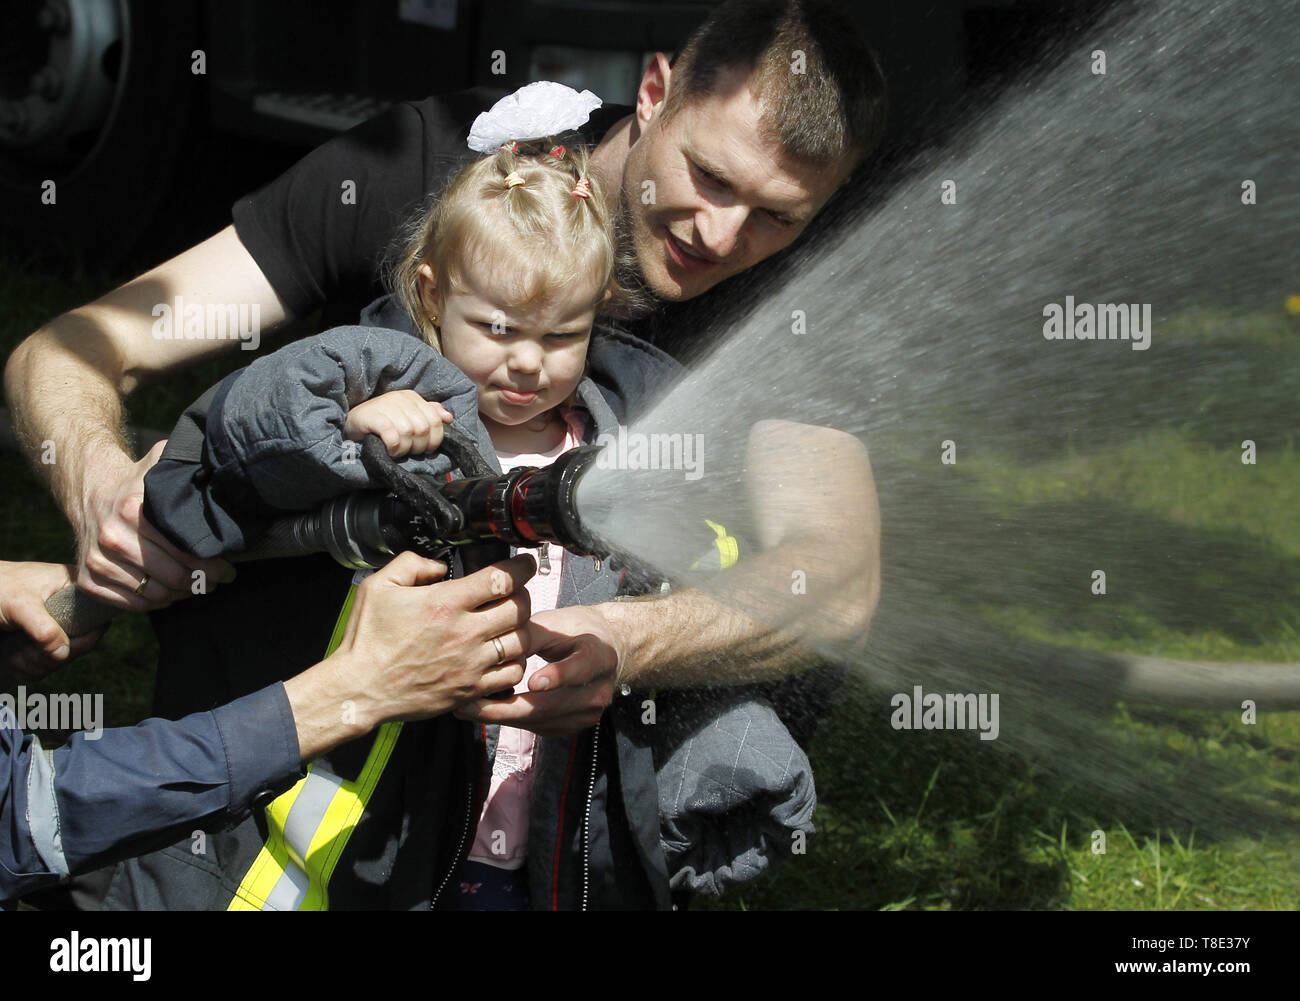 Kiev, Ukraine. 12th May, 2019. Ukrainian little girl seen pouring water from a fire hose during the festival.Children festival also called City of professions. The festival is a children's career-oriented festival exposing them to different professions like atomic engineer, businessmen, scientist, rescuers, bomb experts, policemen, doctors, social workers, criminologists, aircraft designer, firemen and other professions. Credit: Pavlo Gonchar/SOPA Images/ZUMA Wire/Alamy Live News Stock Photo